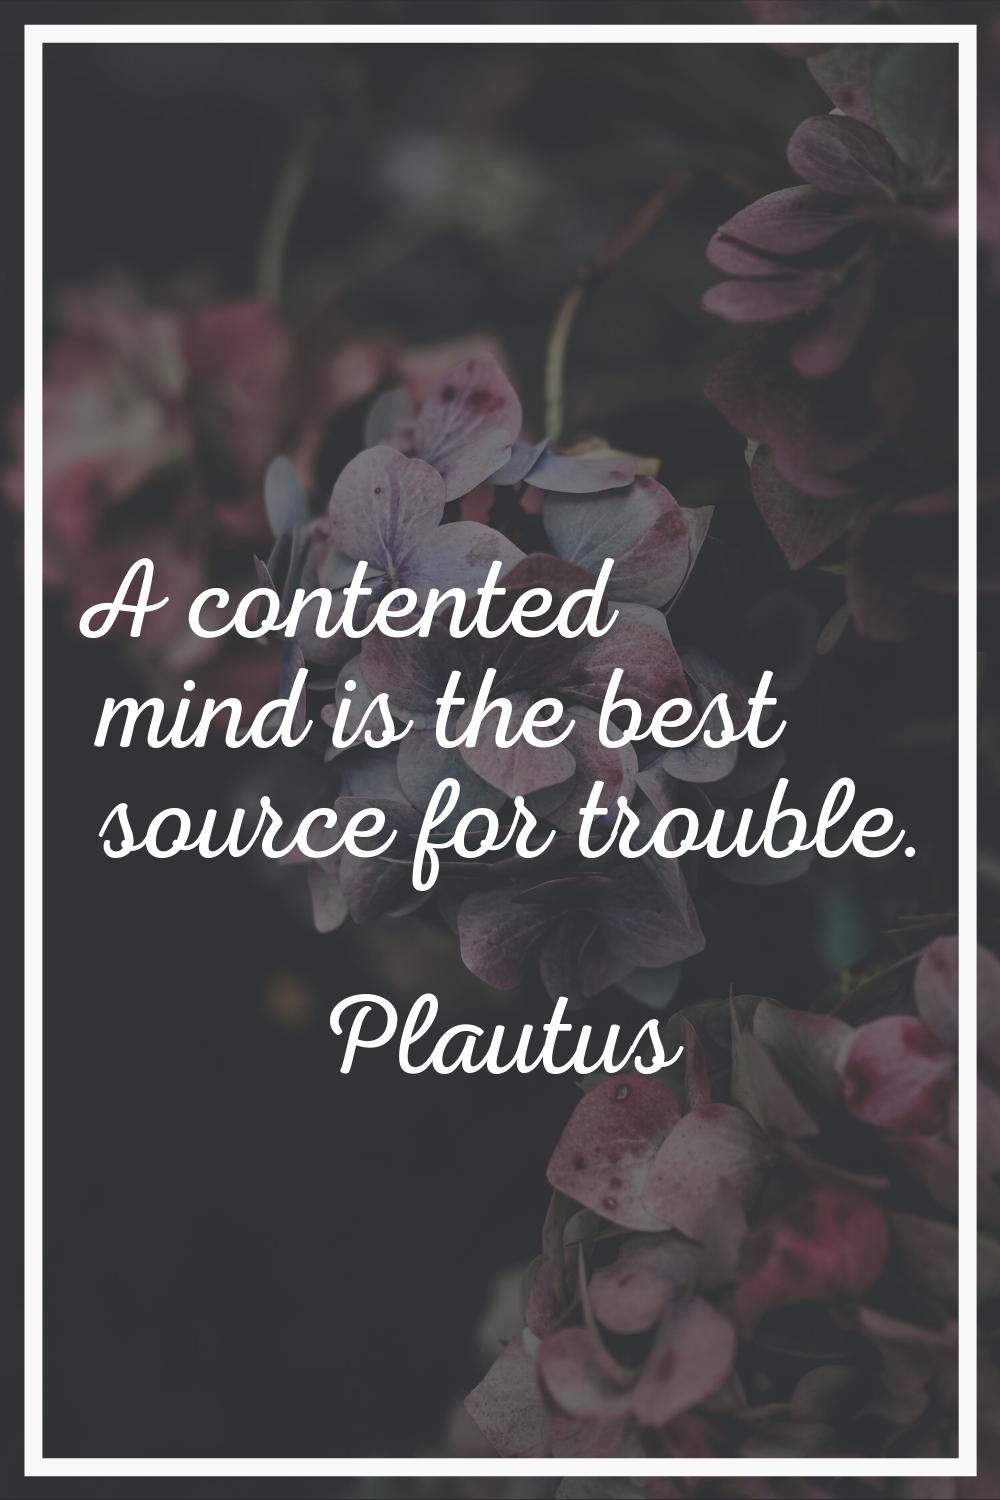 A contented mind is the best source for trouble.